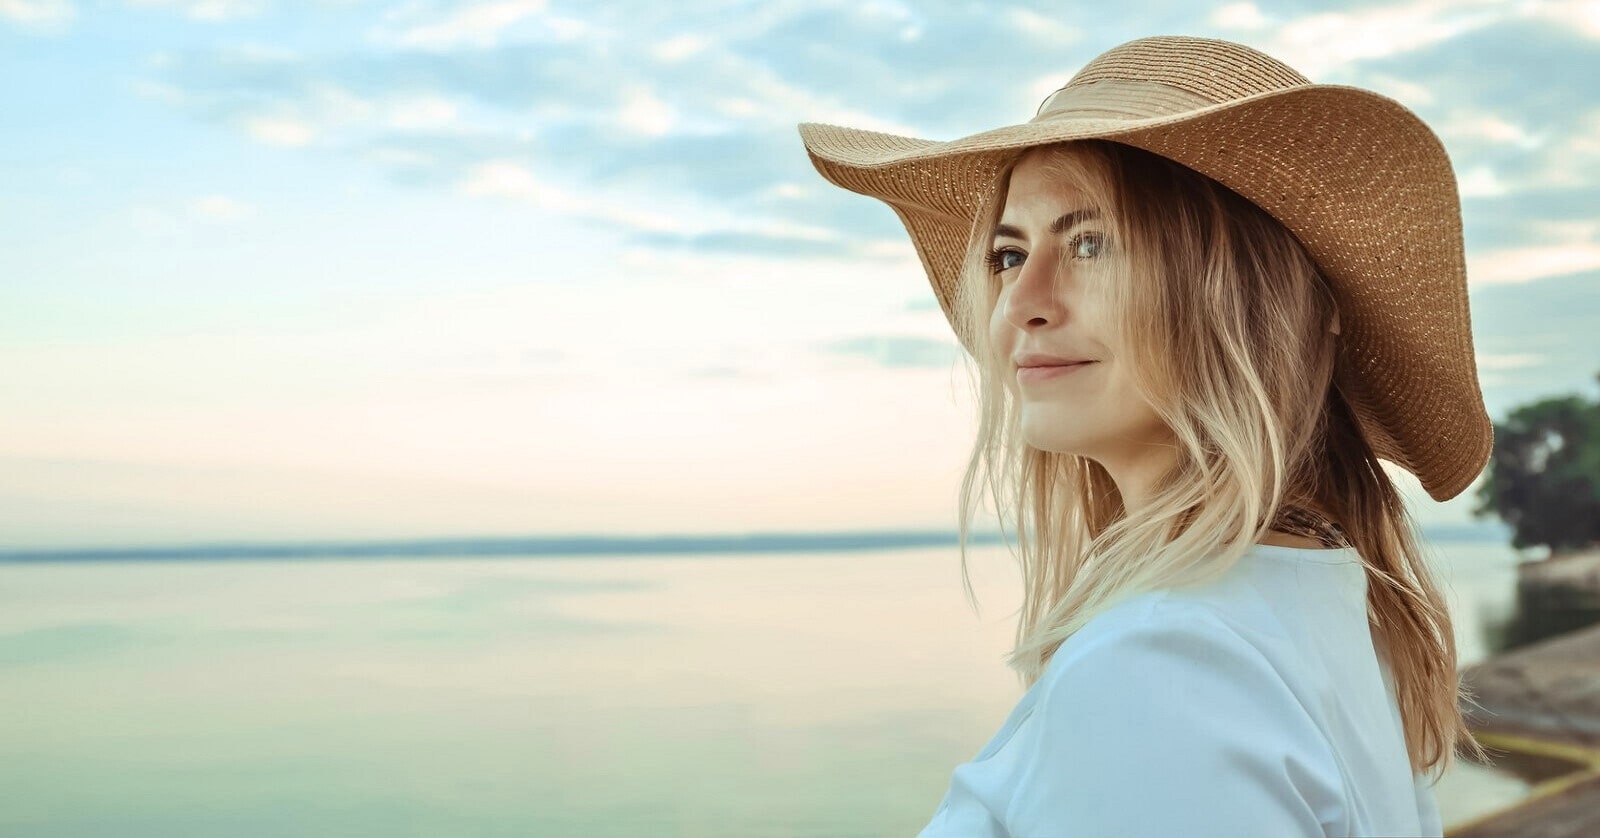 30-year-old woman wearing a large beach hat looking out over the ocean